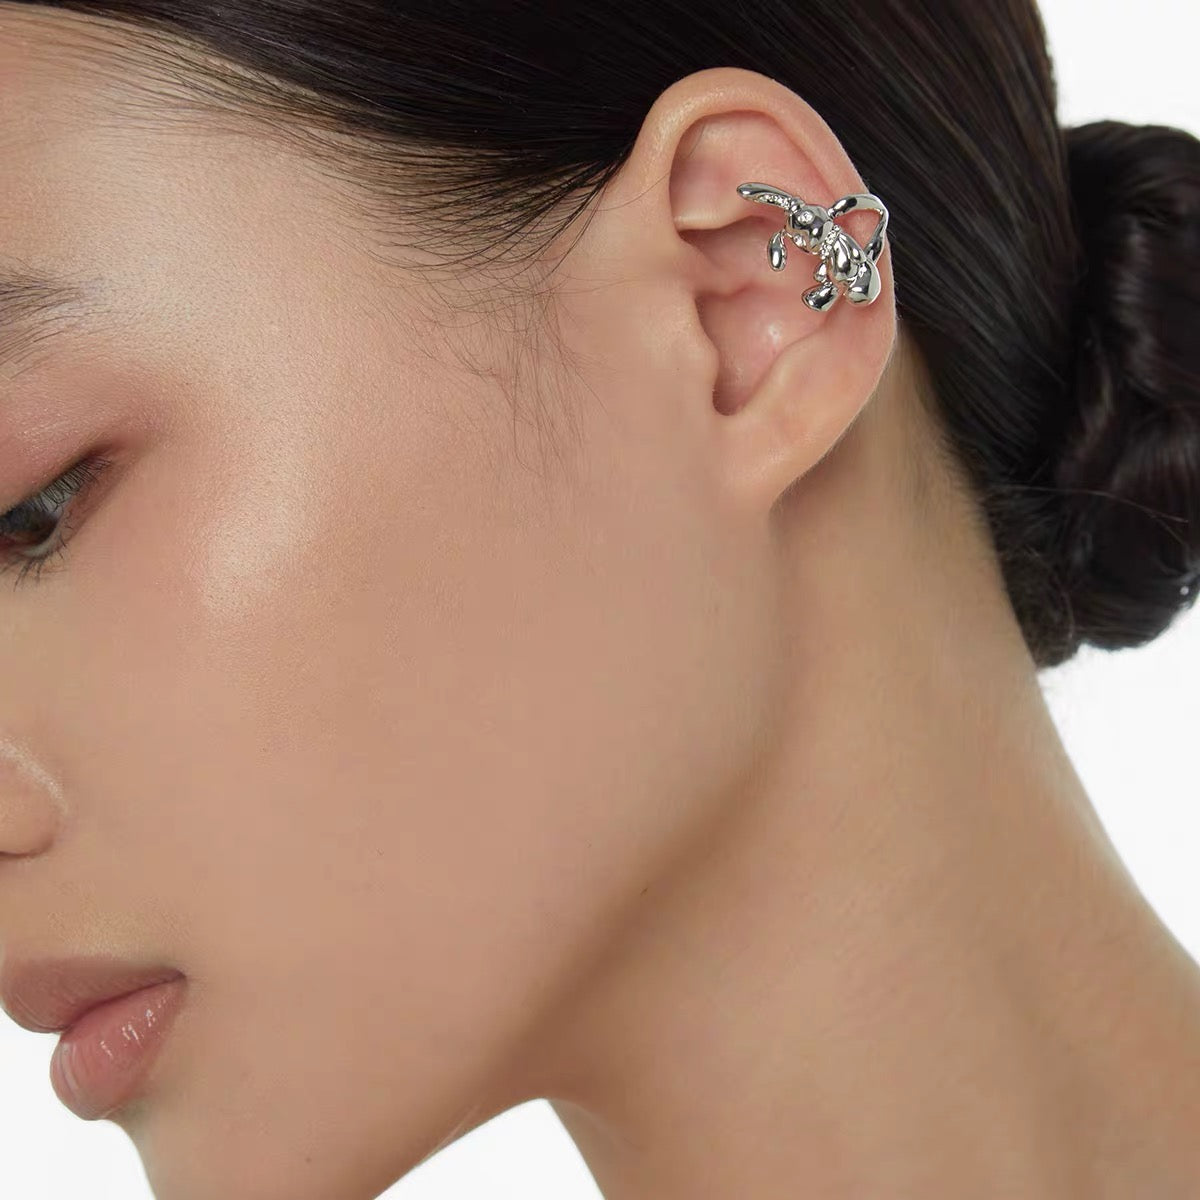 New Years Luck Ear Cuff | Year of the Bunny BOONEE [H208] – HALUCYON